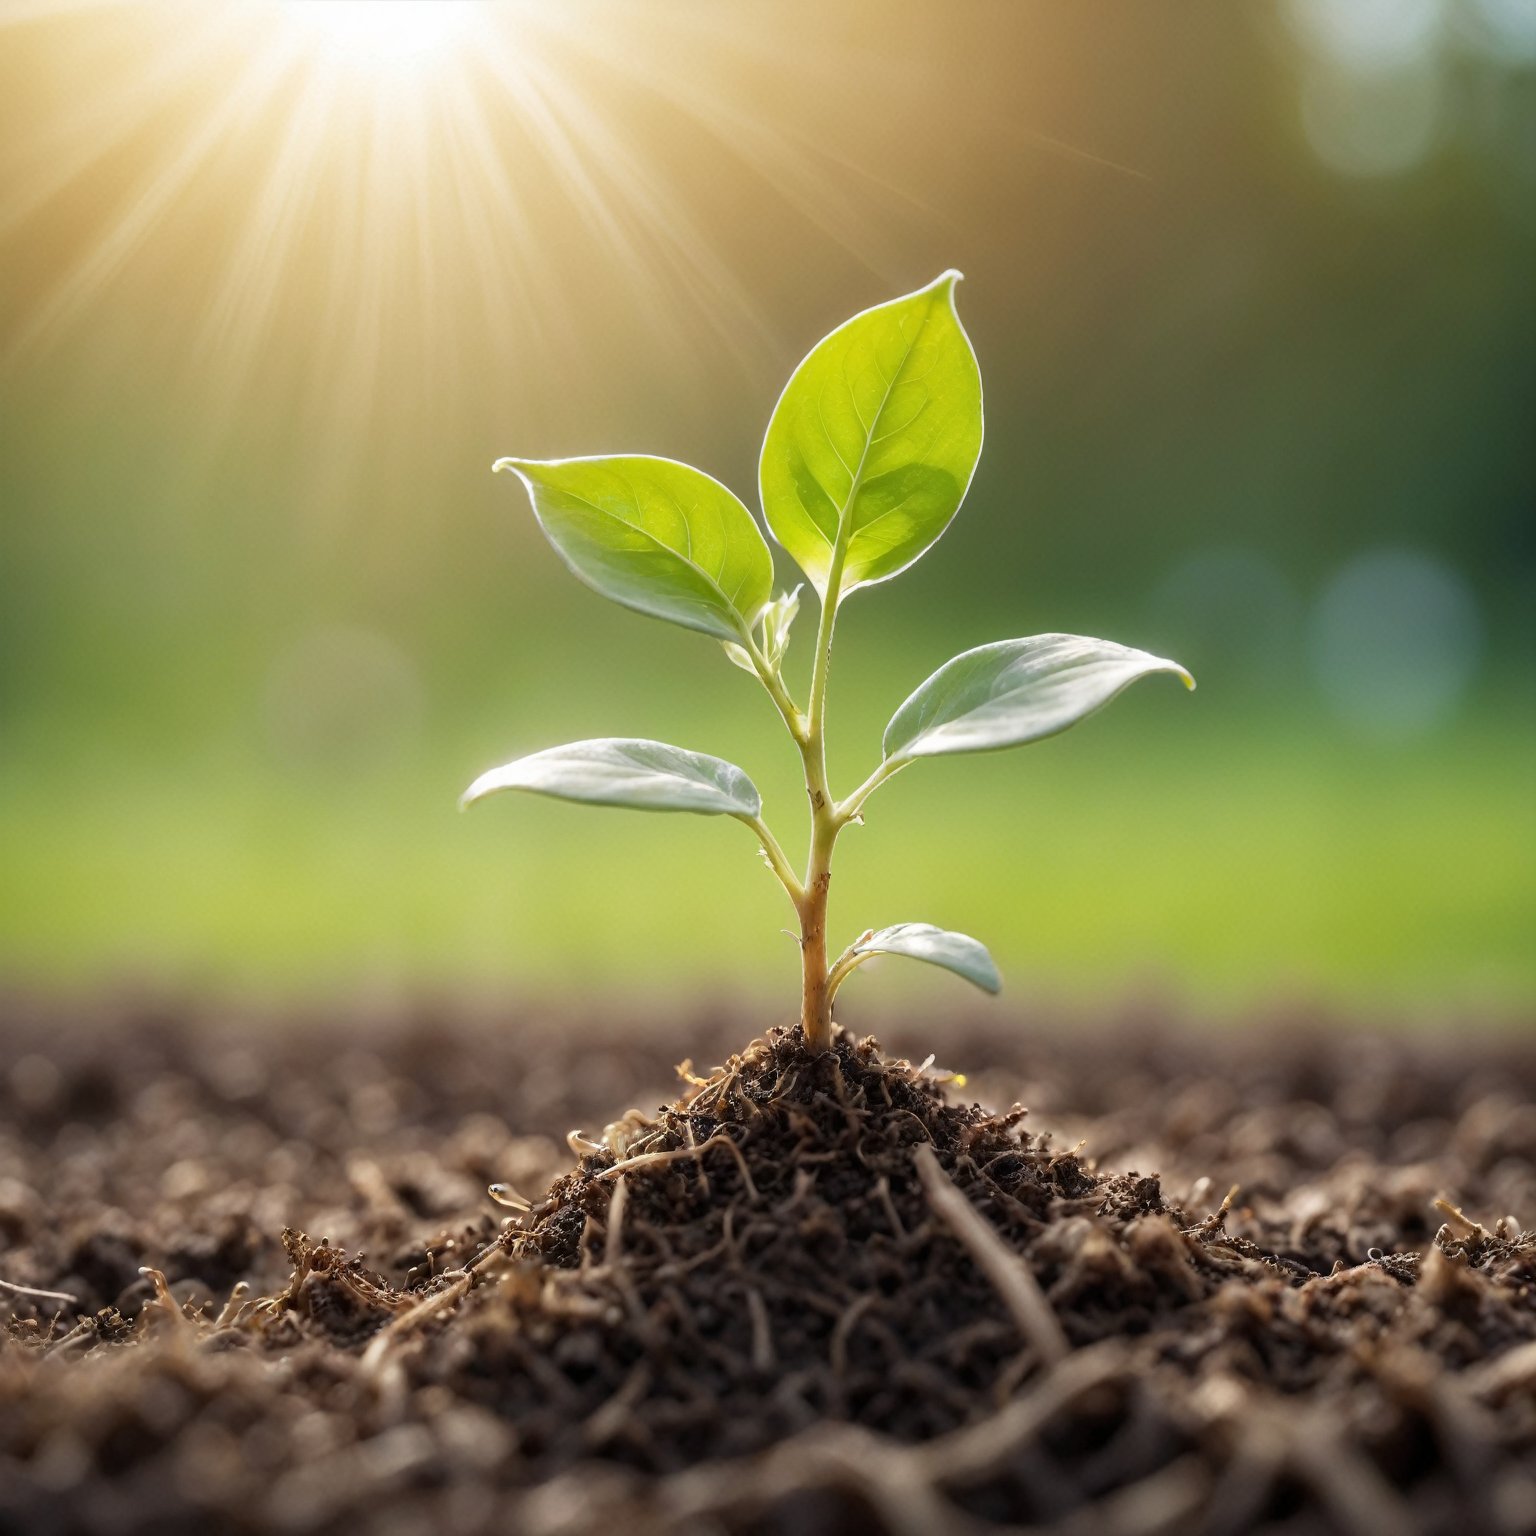 (best quality,8K,highres,masterpiece), ultra-detailed, tree planting, a small plant sprouting from the ground in the sun light with a blurry background